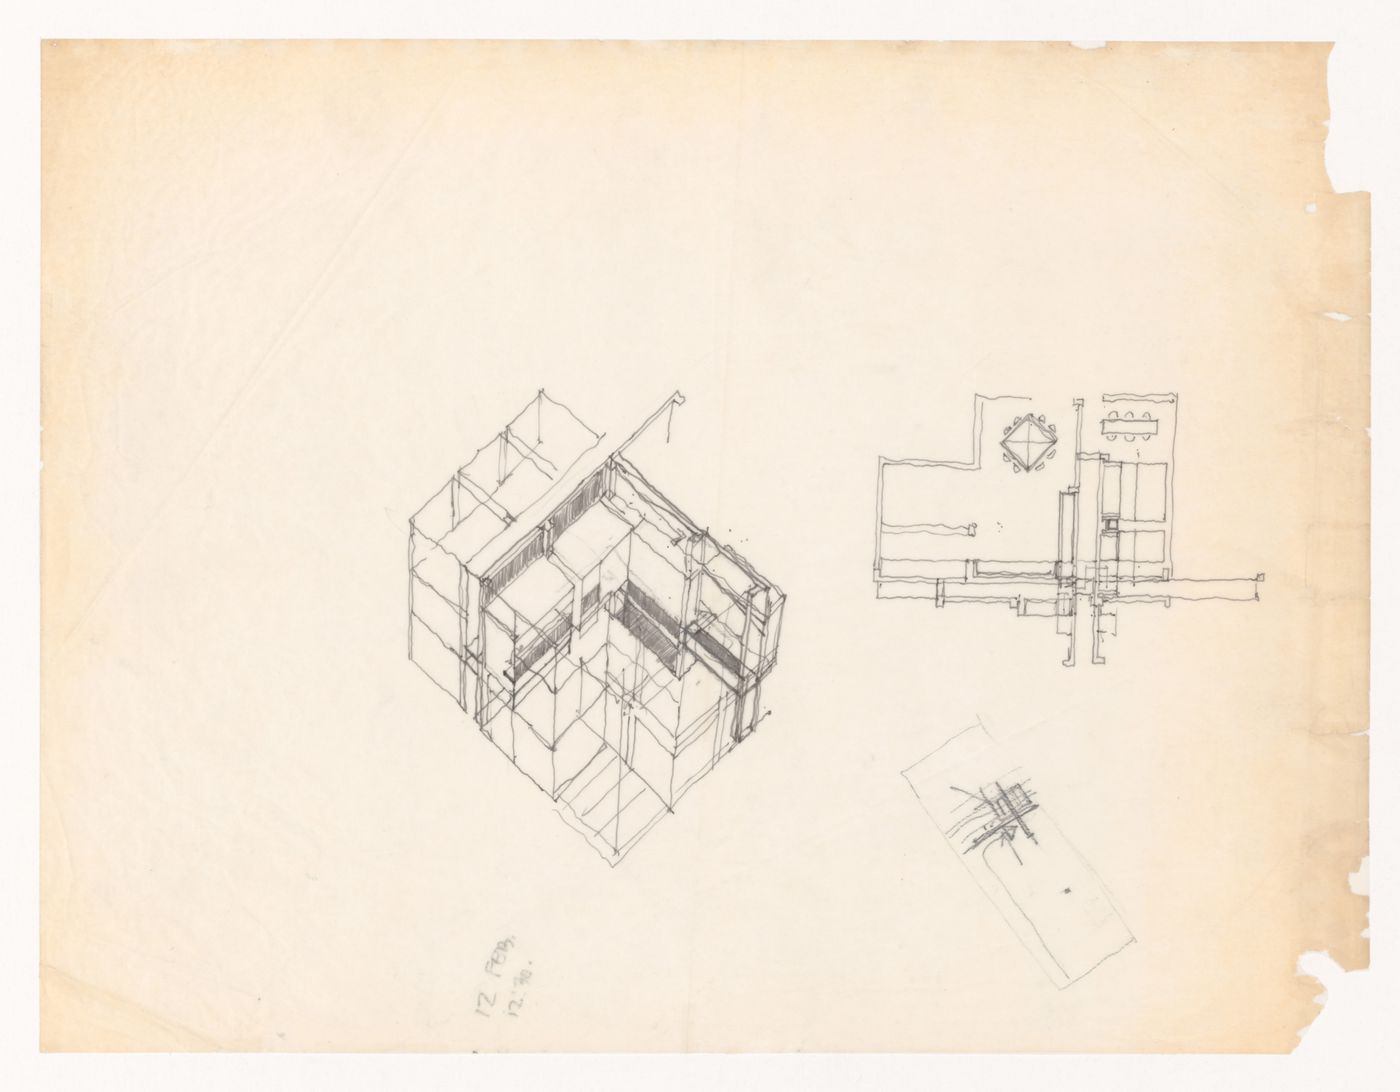 Sketch axonometric and plans for House VI, Cornwall, Connecticut